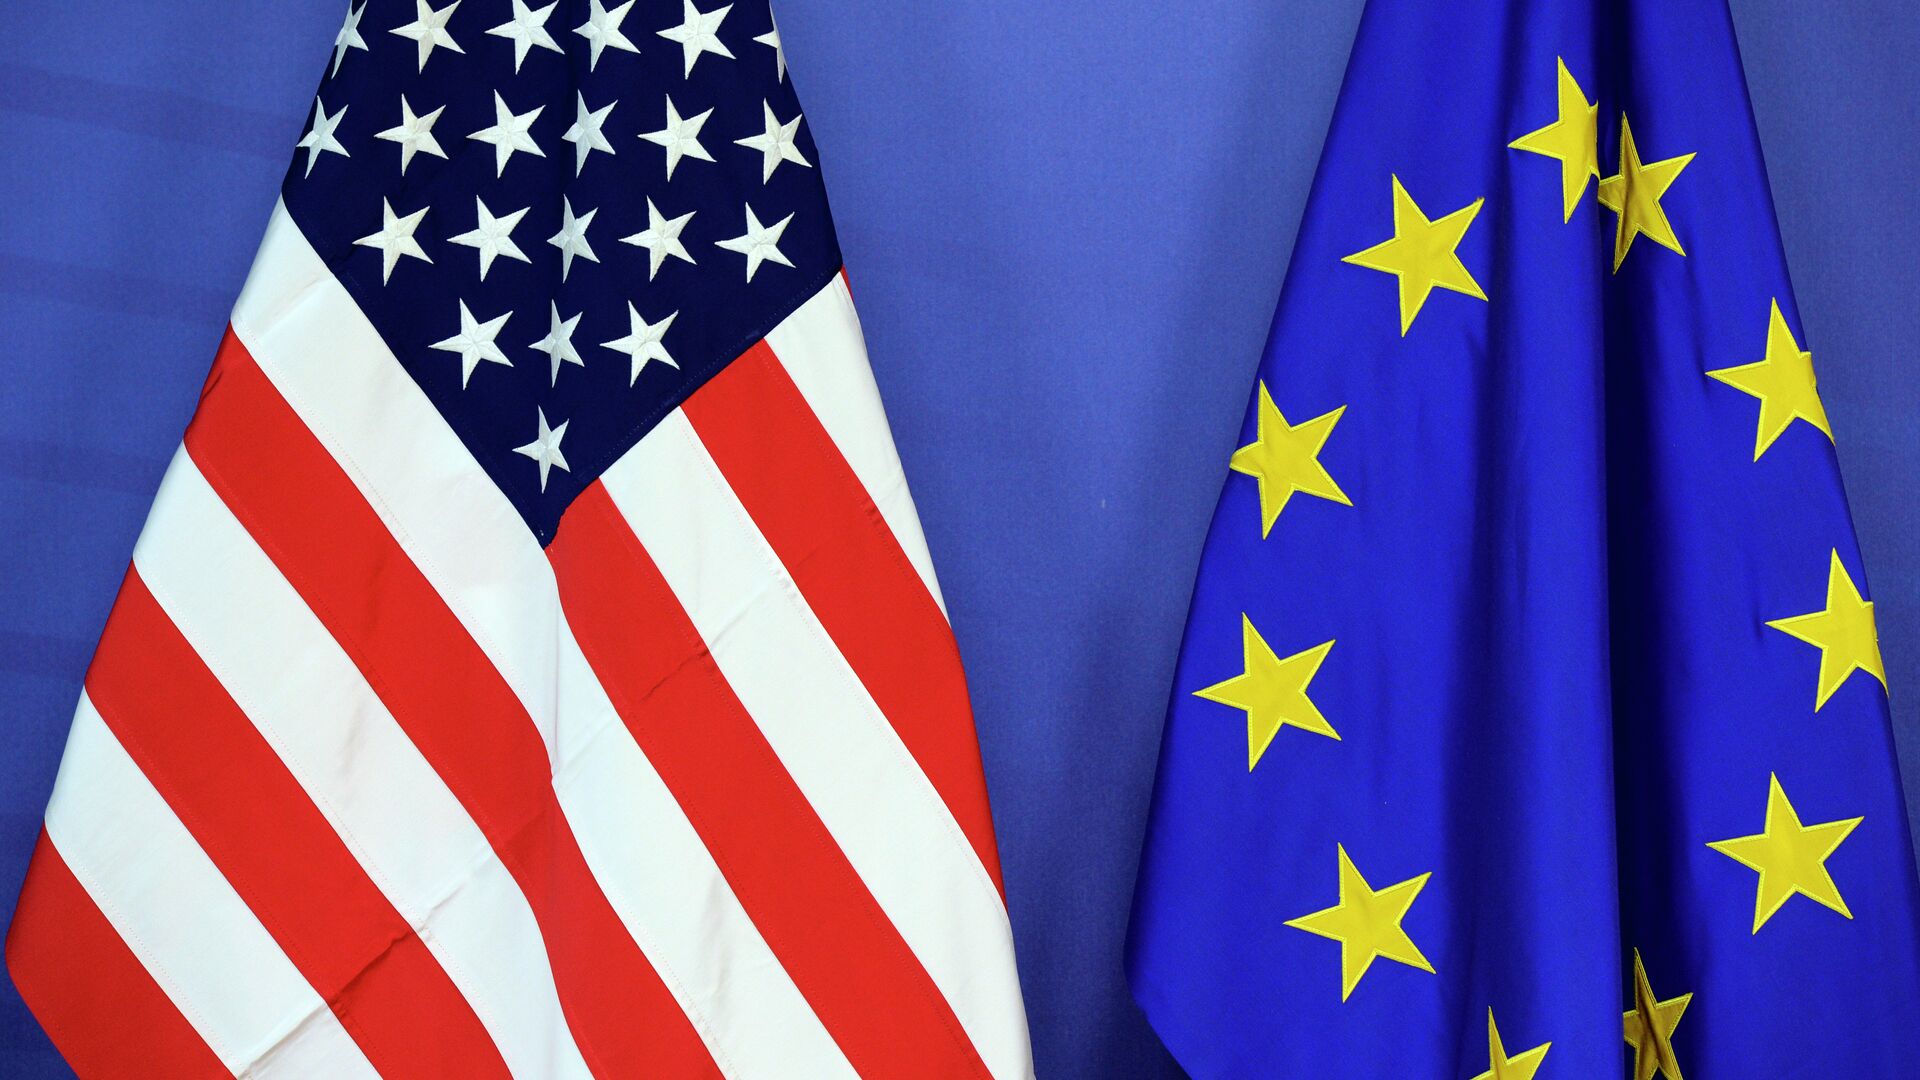 The US national flag (L) and the flag of the European Union are placed side-by-side during the Transatlantic Trade and Investment Partnership (TTIP) meeting at the European Union Commission headquarter in Brussels, on July 13, 2015 - Sputnik Mundo, 1920, 02.03.2021